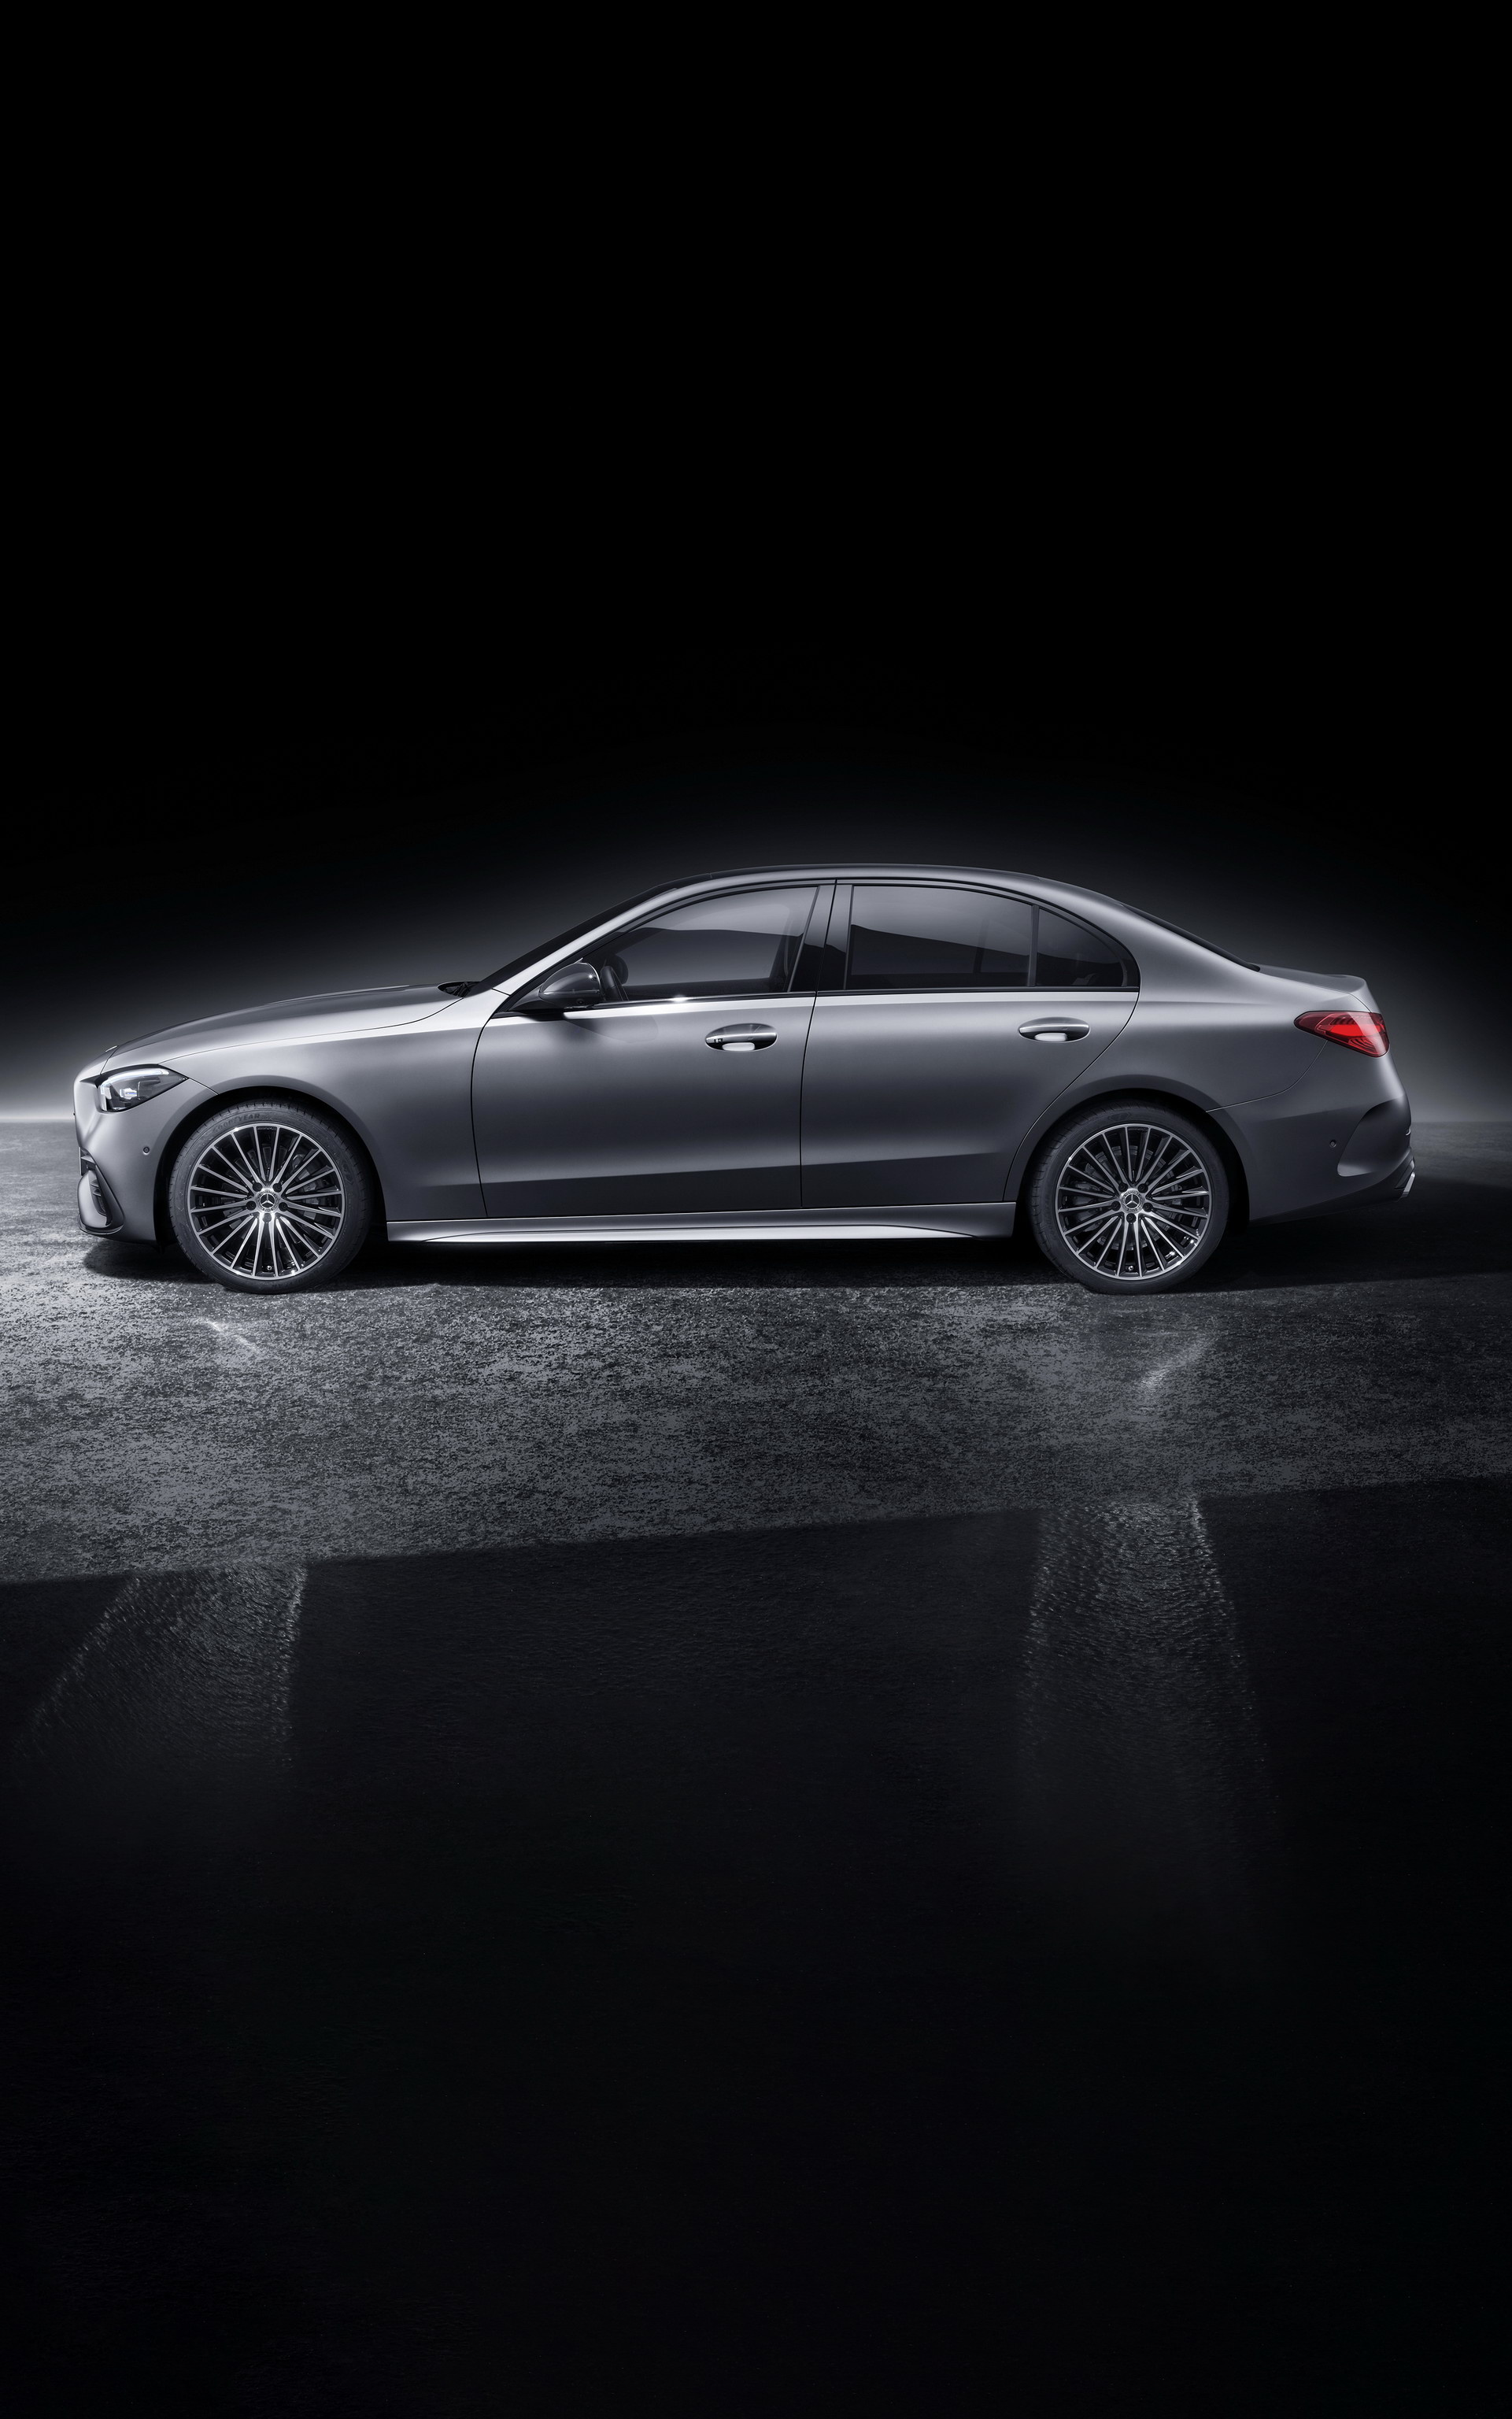 Mercedes-Benz C-Class, Side view, Phone wallpapers, Latest model, 1930x3080 HD Phone